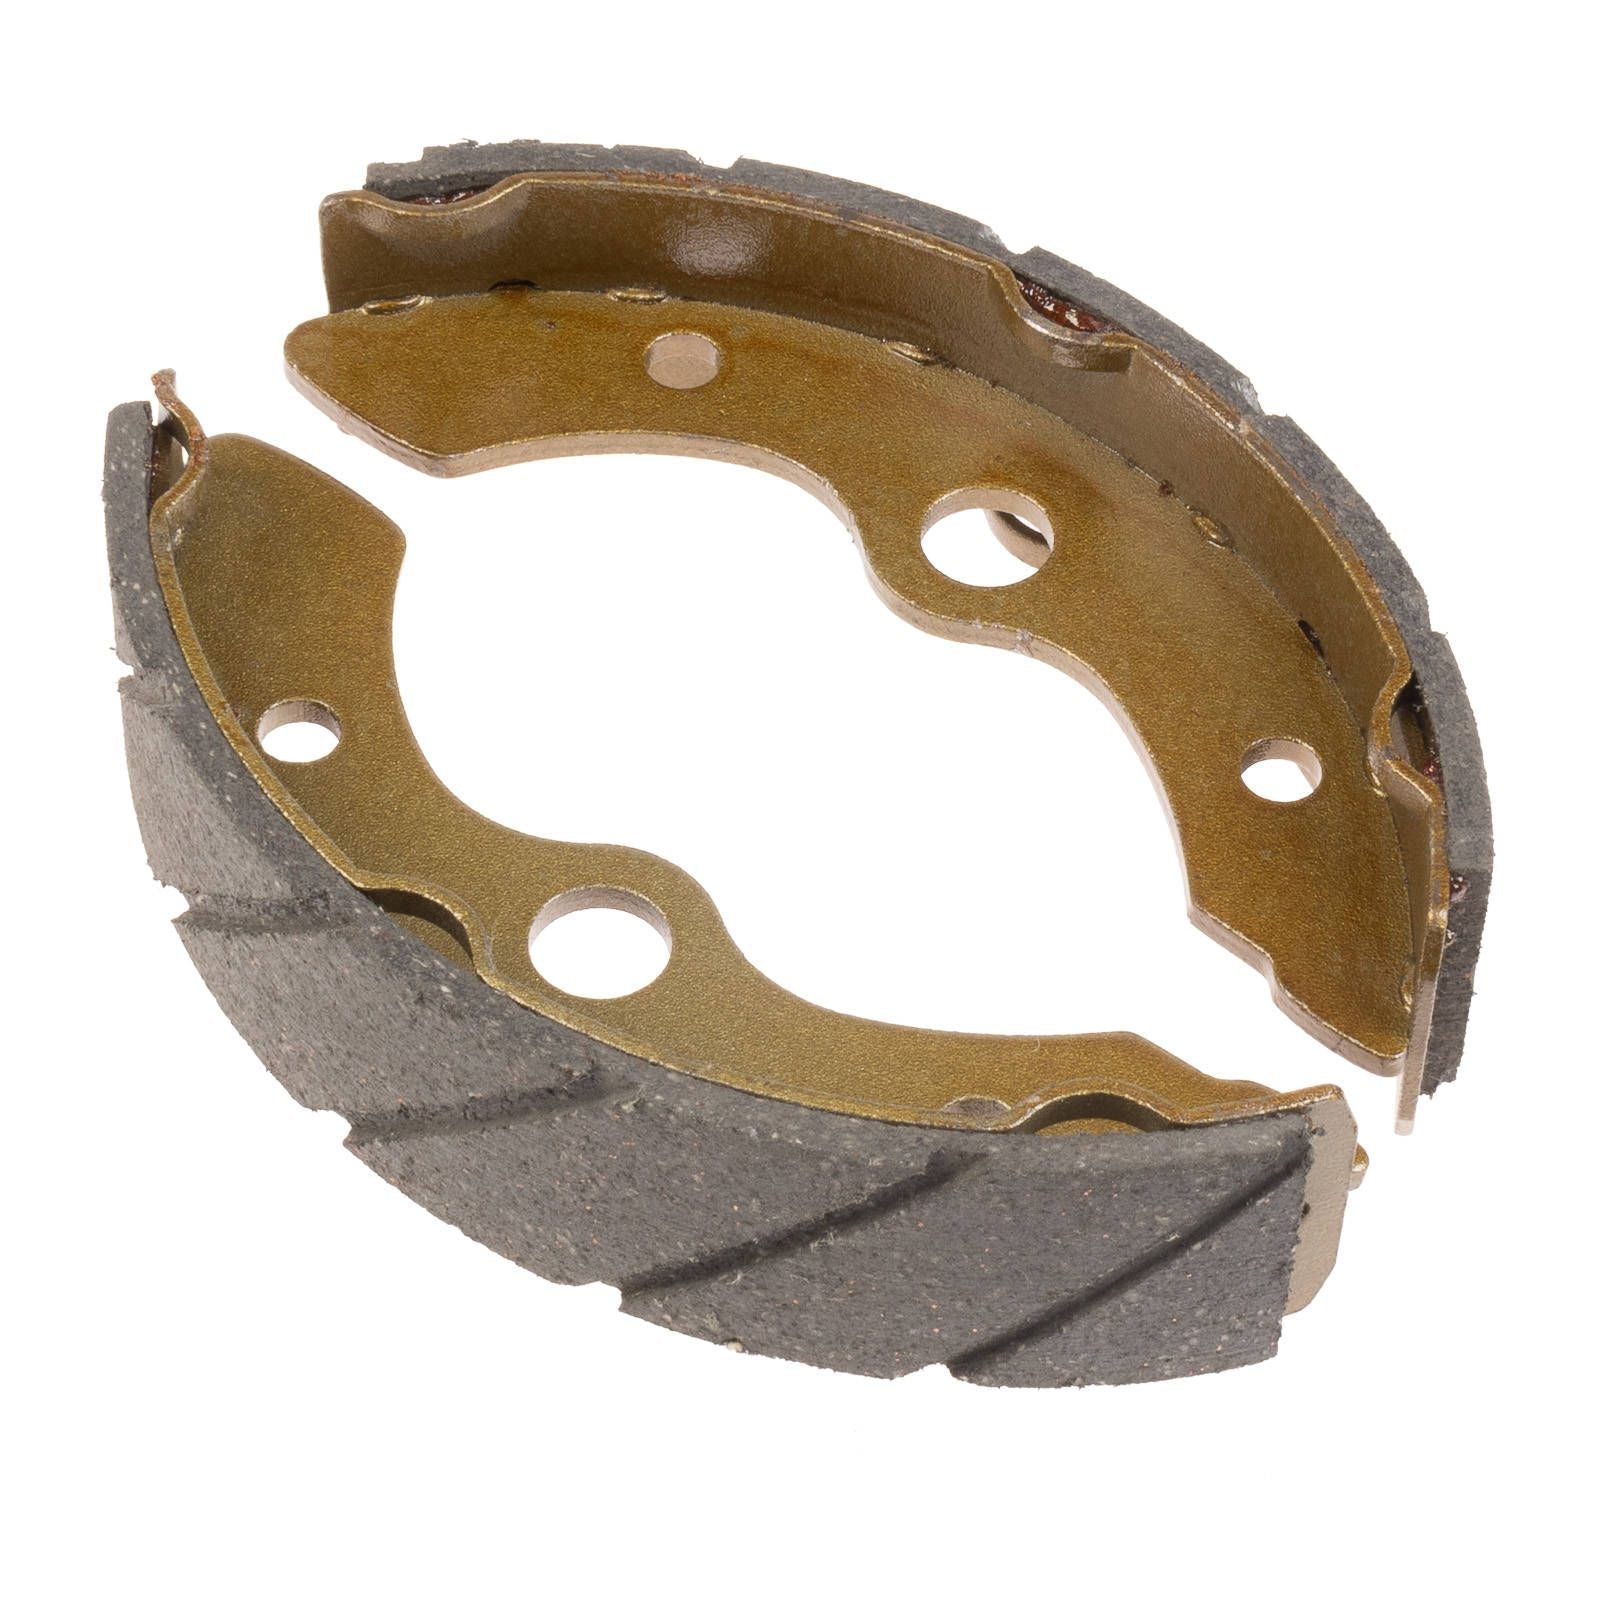 New WHITES Motorcycle Brake Shoes - Water Groove #WPBS39169